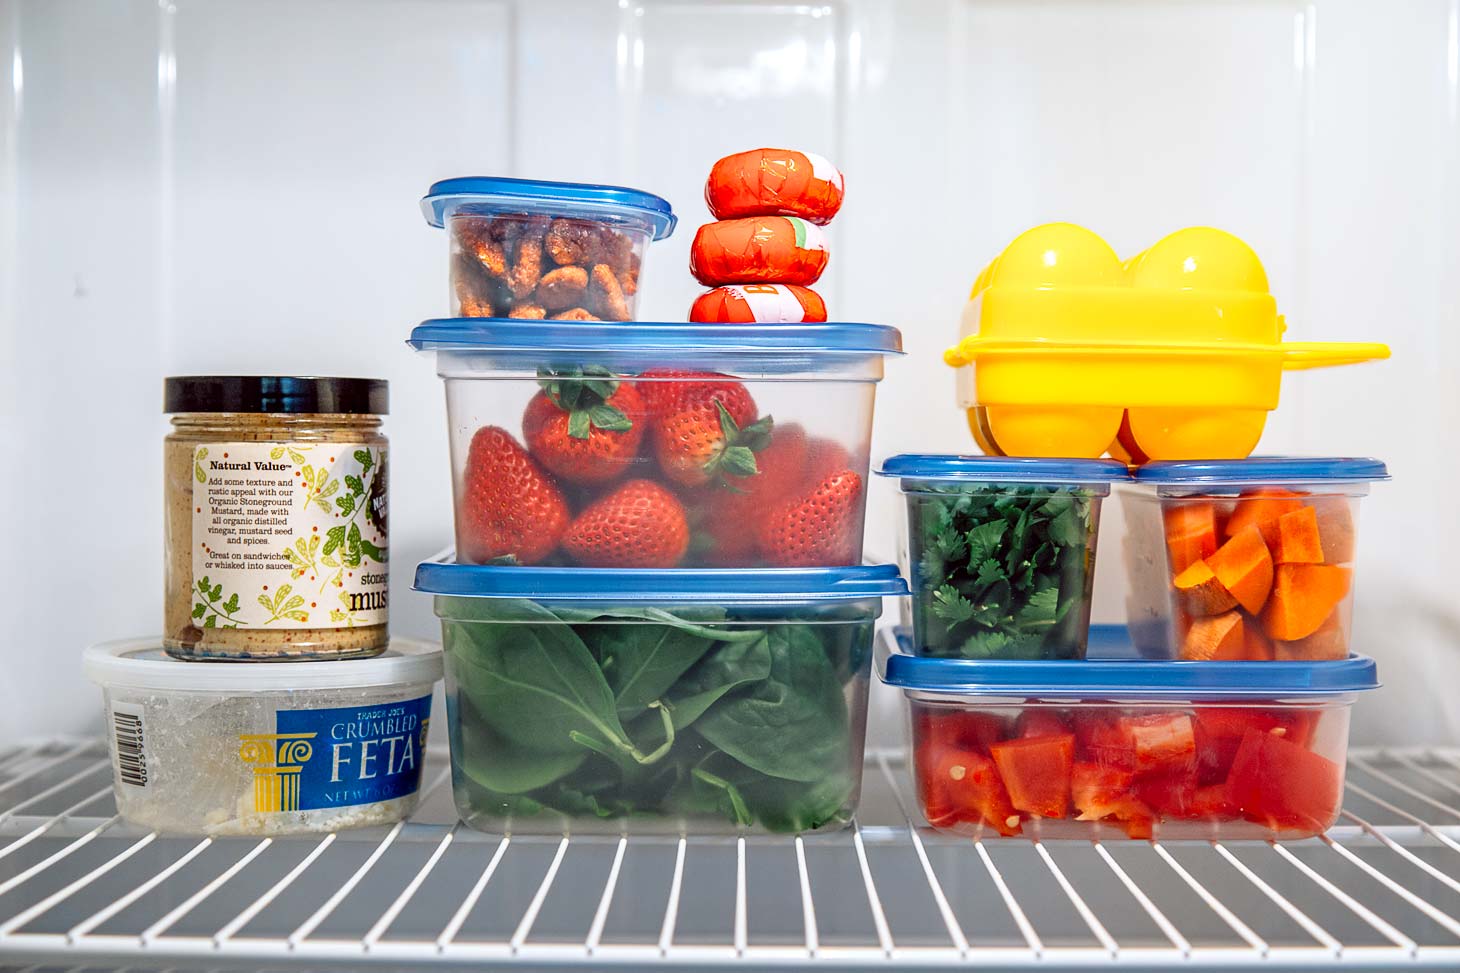 Watertight containers of food stacked on a refrigerator shelf.